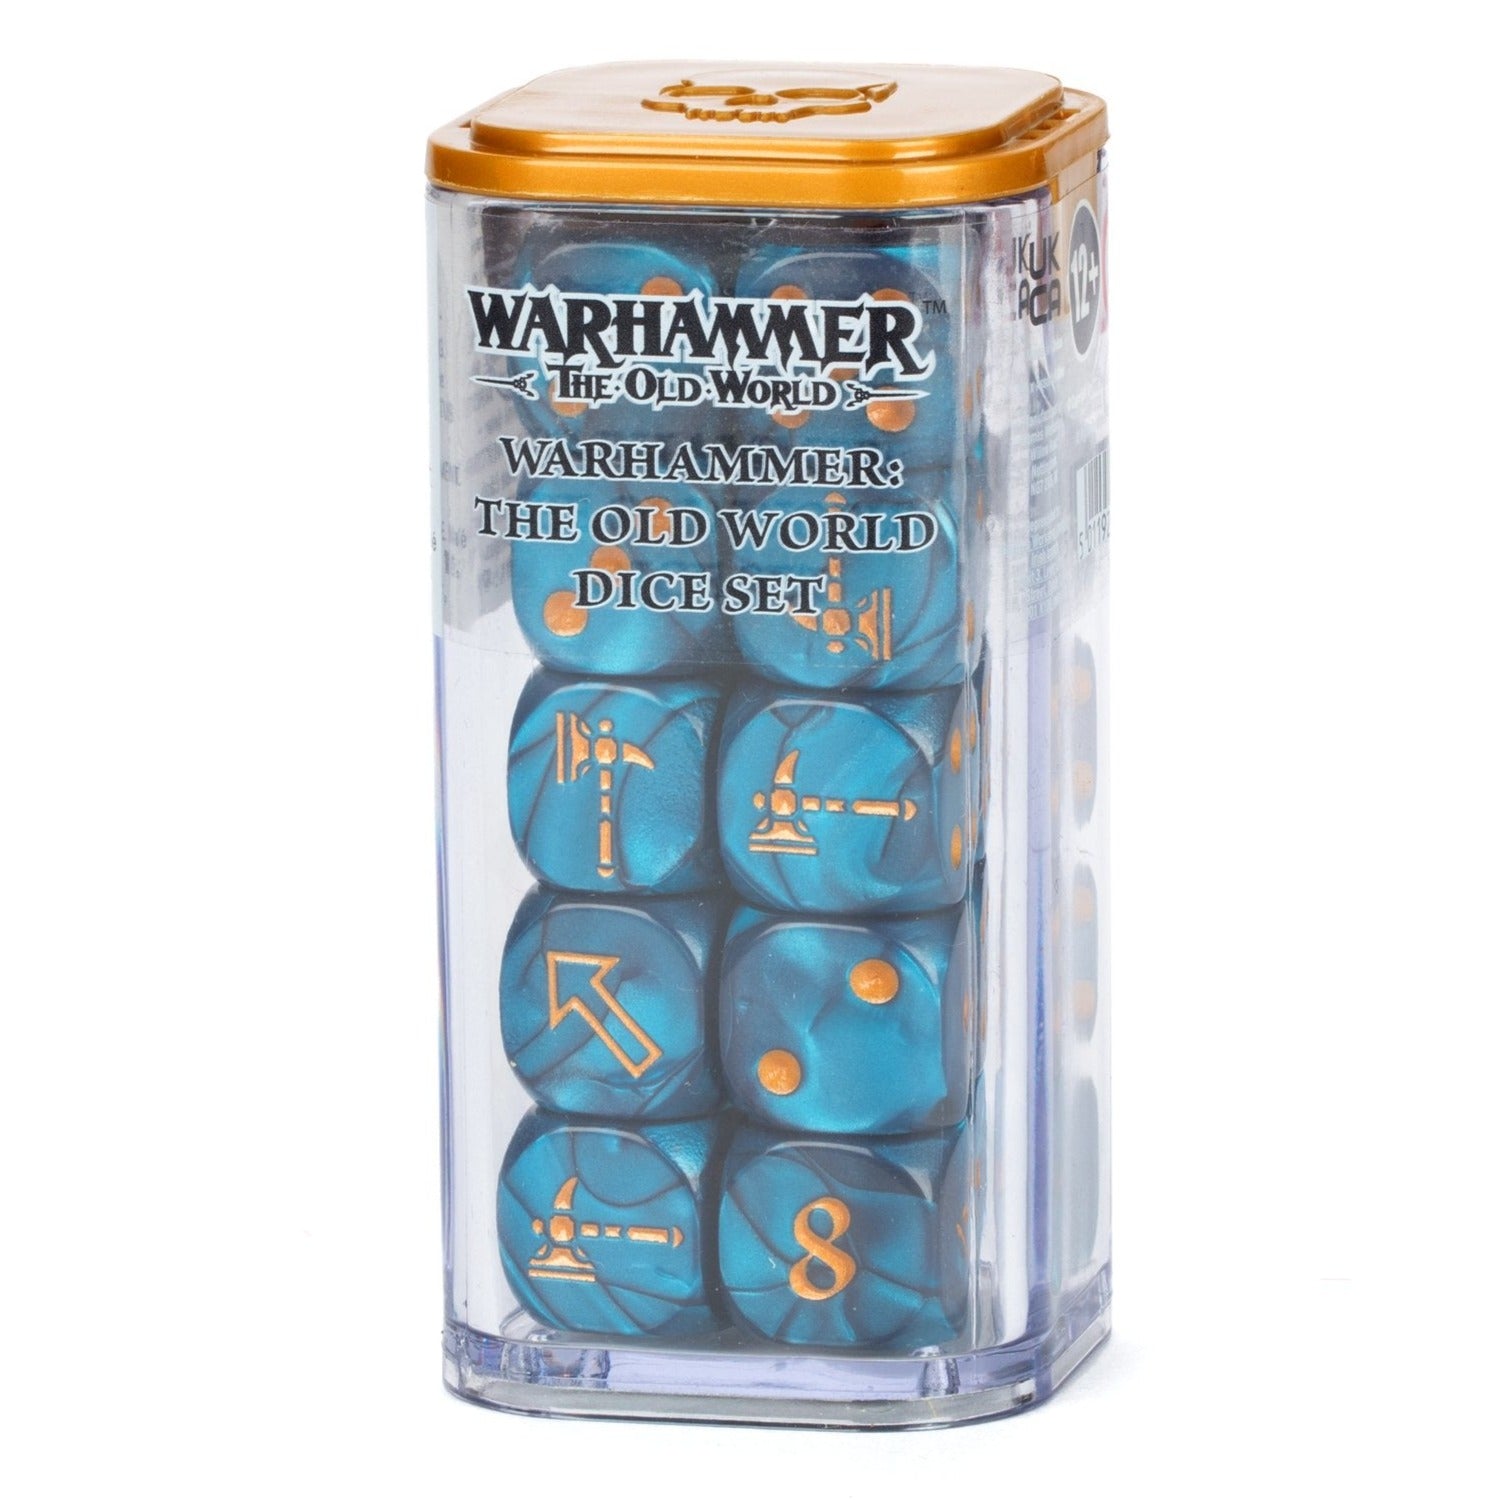 Warhammer: The Old World - Dice Set - Release Date 20/1/24 - Loaded Dice Barry Vale of Glamorgan CF64 3HD